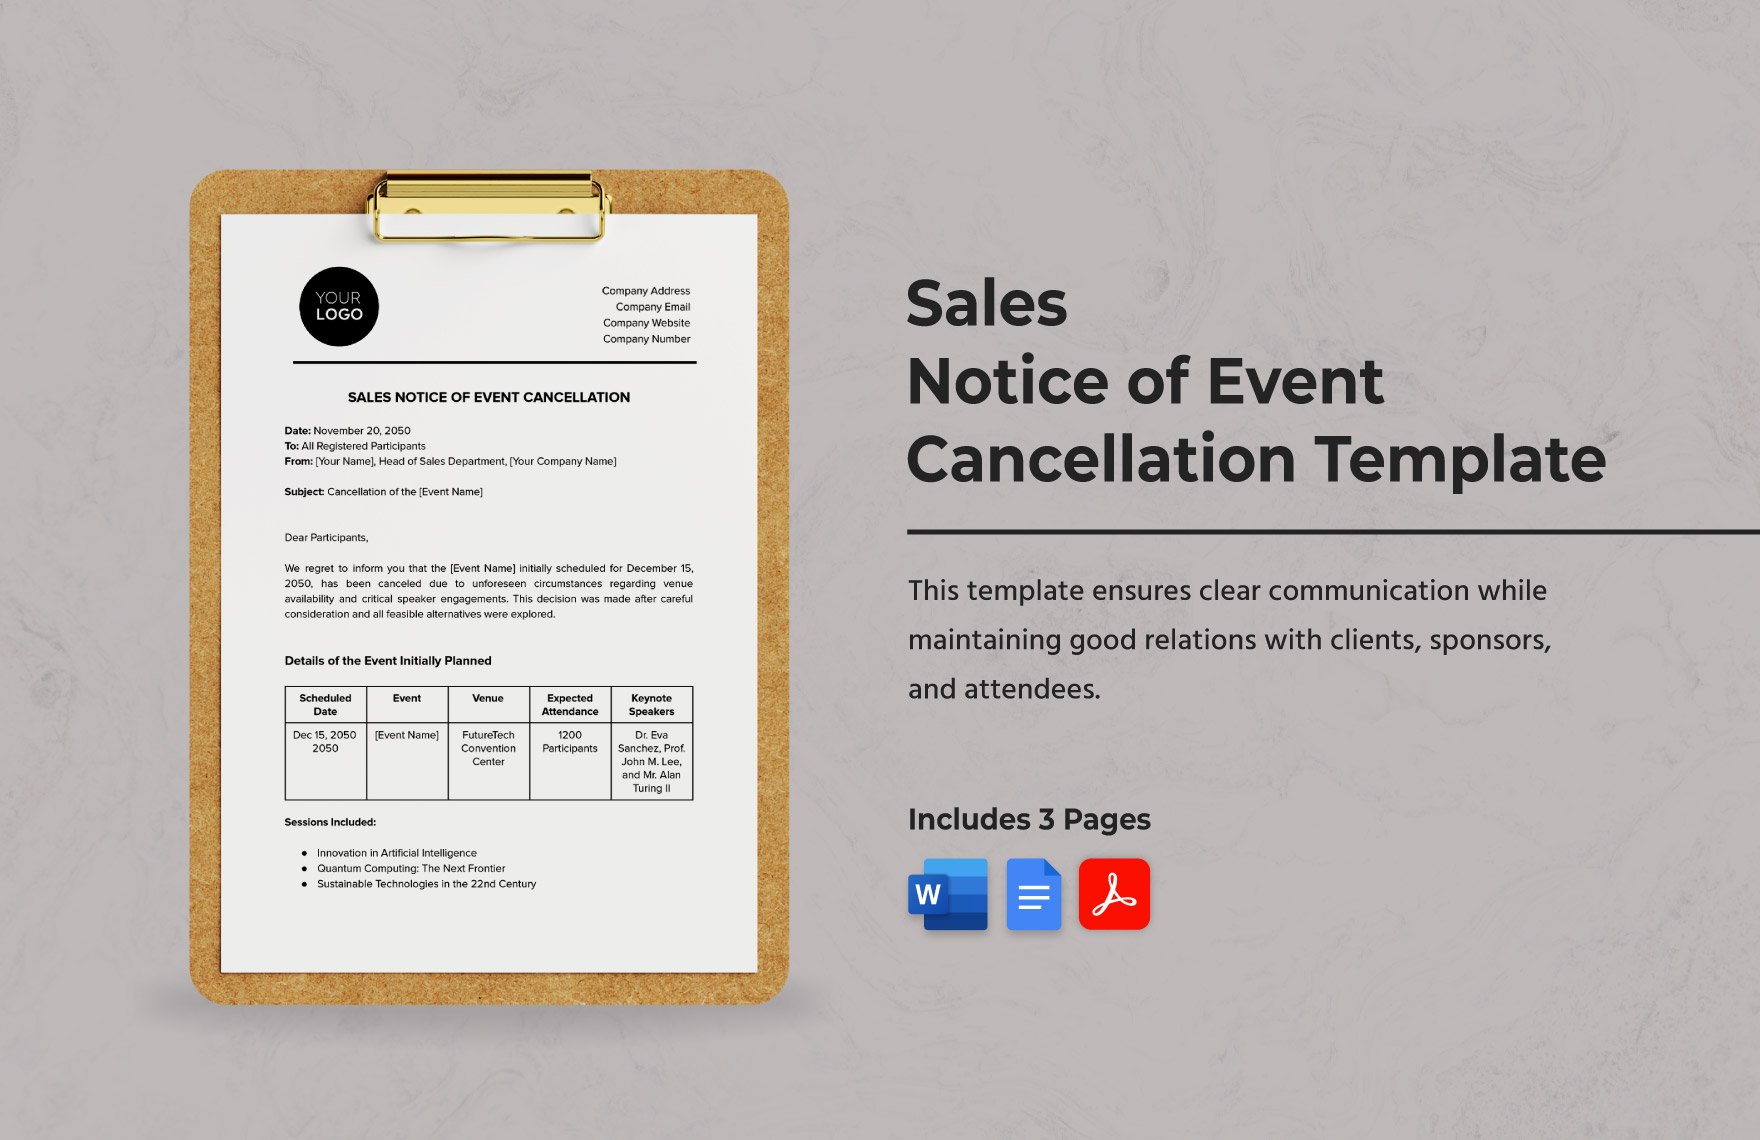 Sales Notice of Event Cancellation Template in Word, Google Docs, PDF